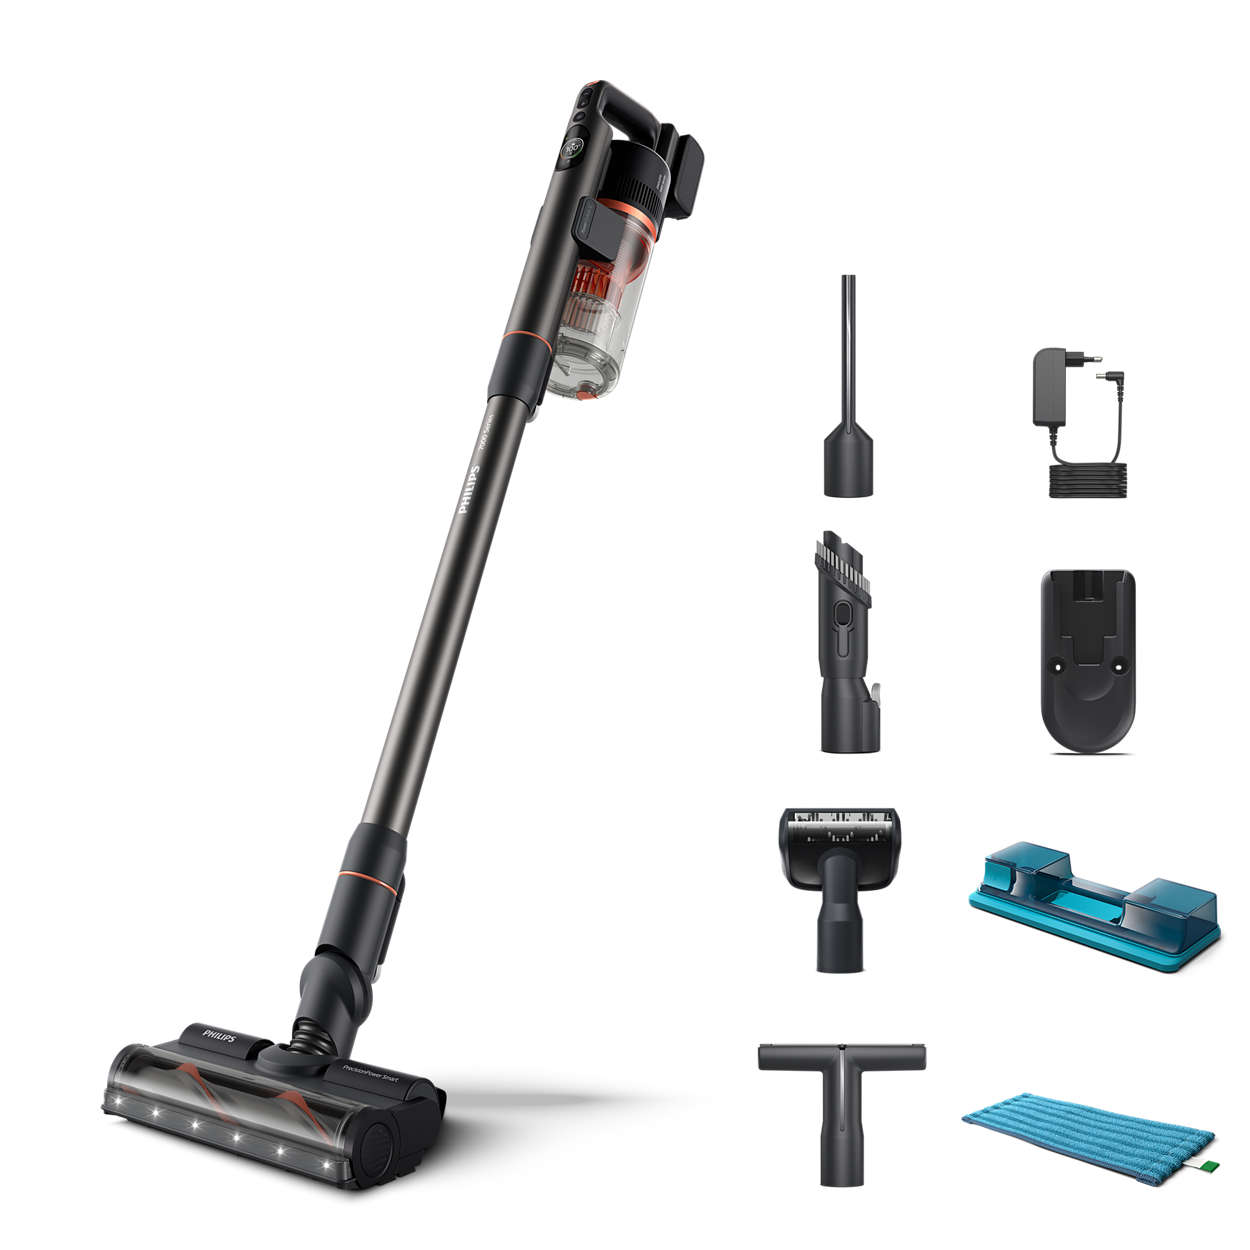 Cleans more dust & dirt than any cordless vacuum(3)